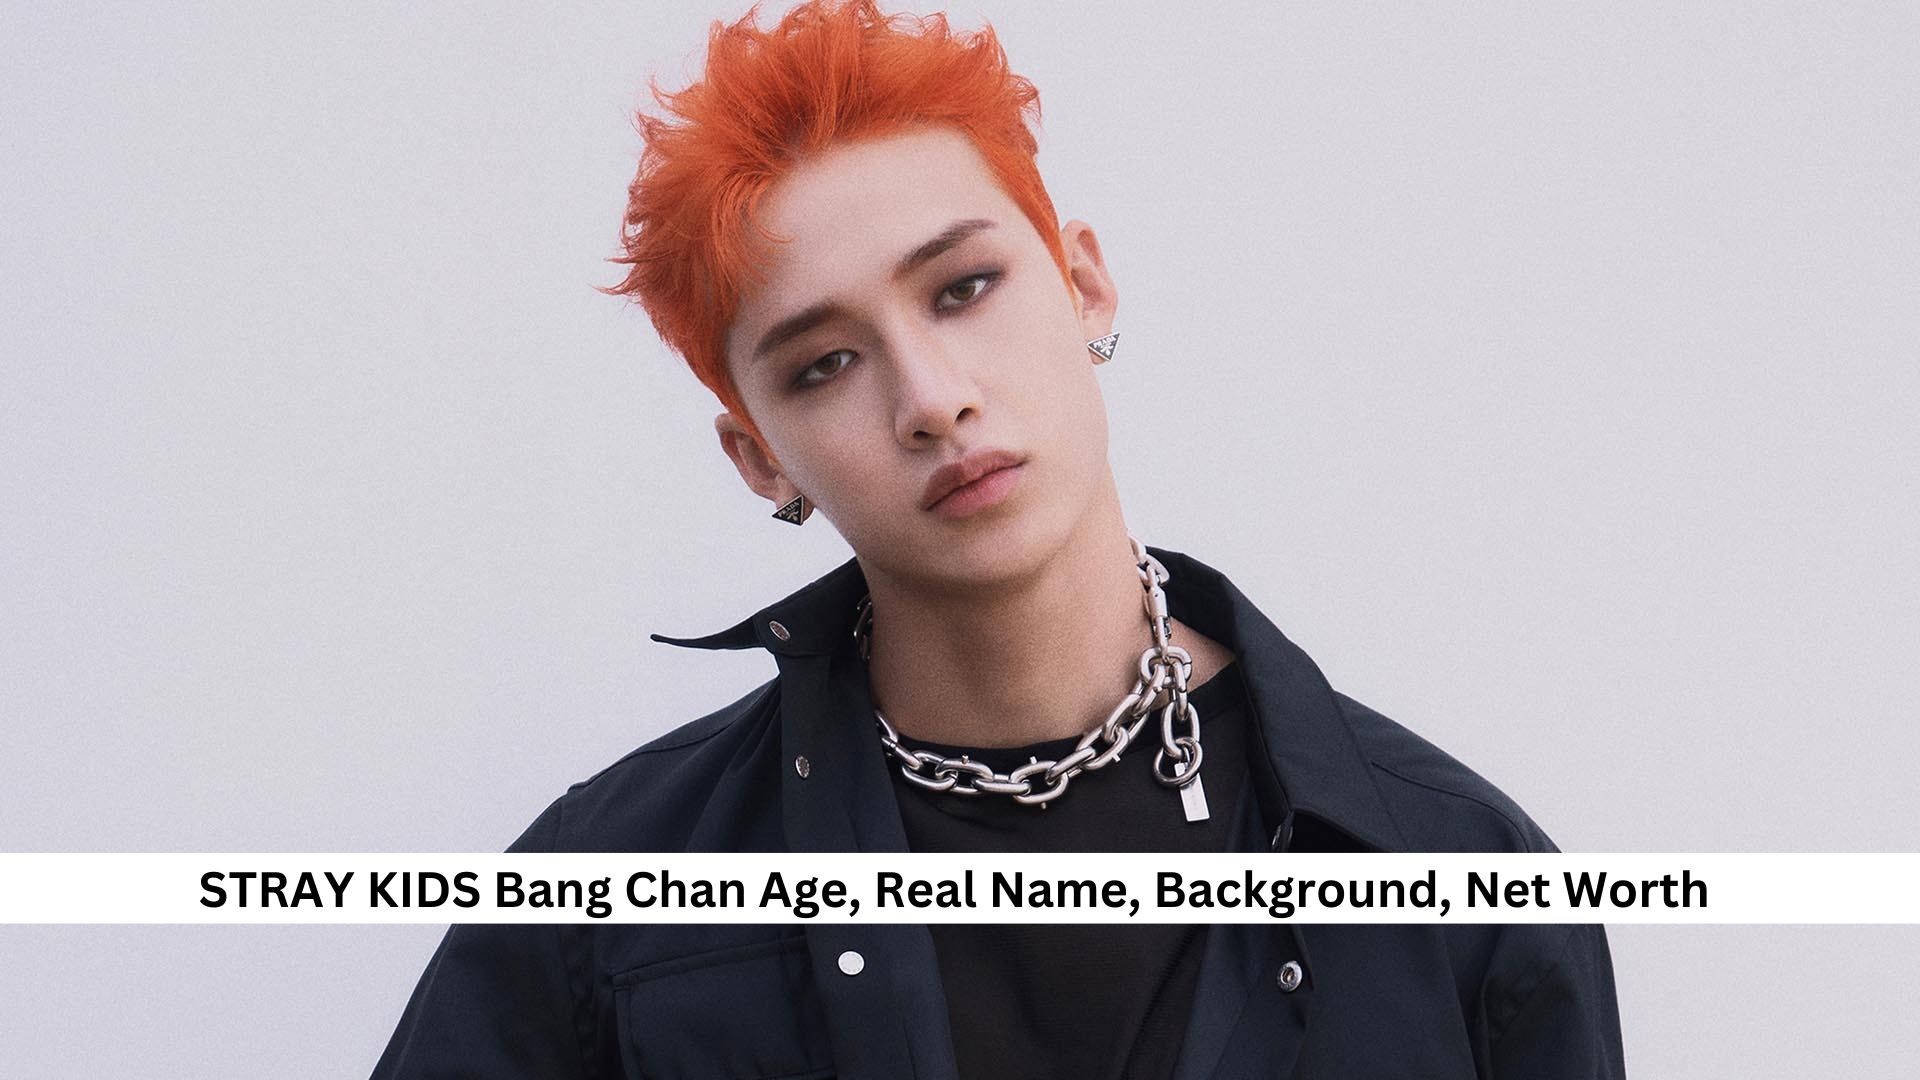 STRAY KIDS Bang Chan Age, Real Name, Background, Net Worth